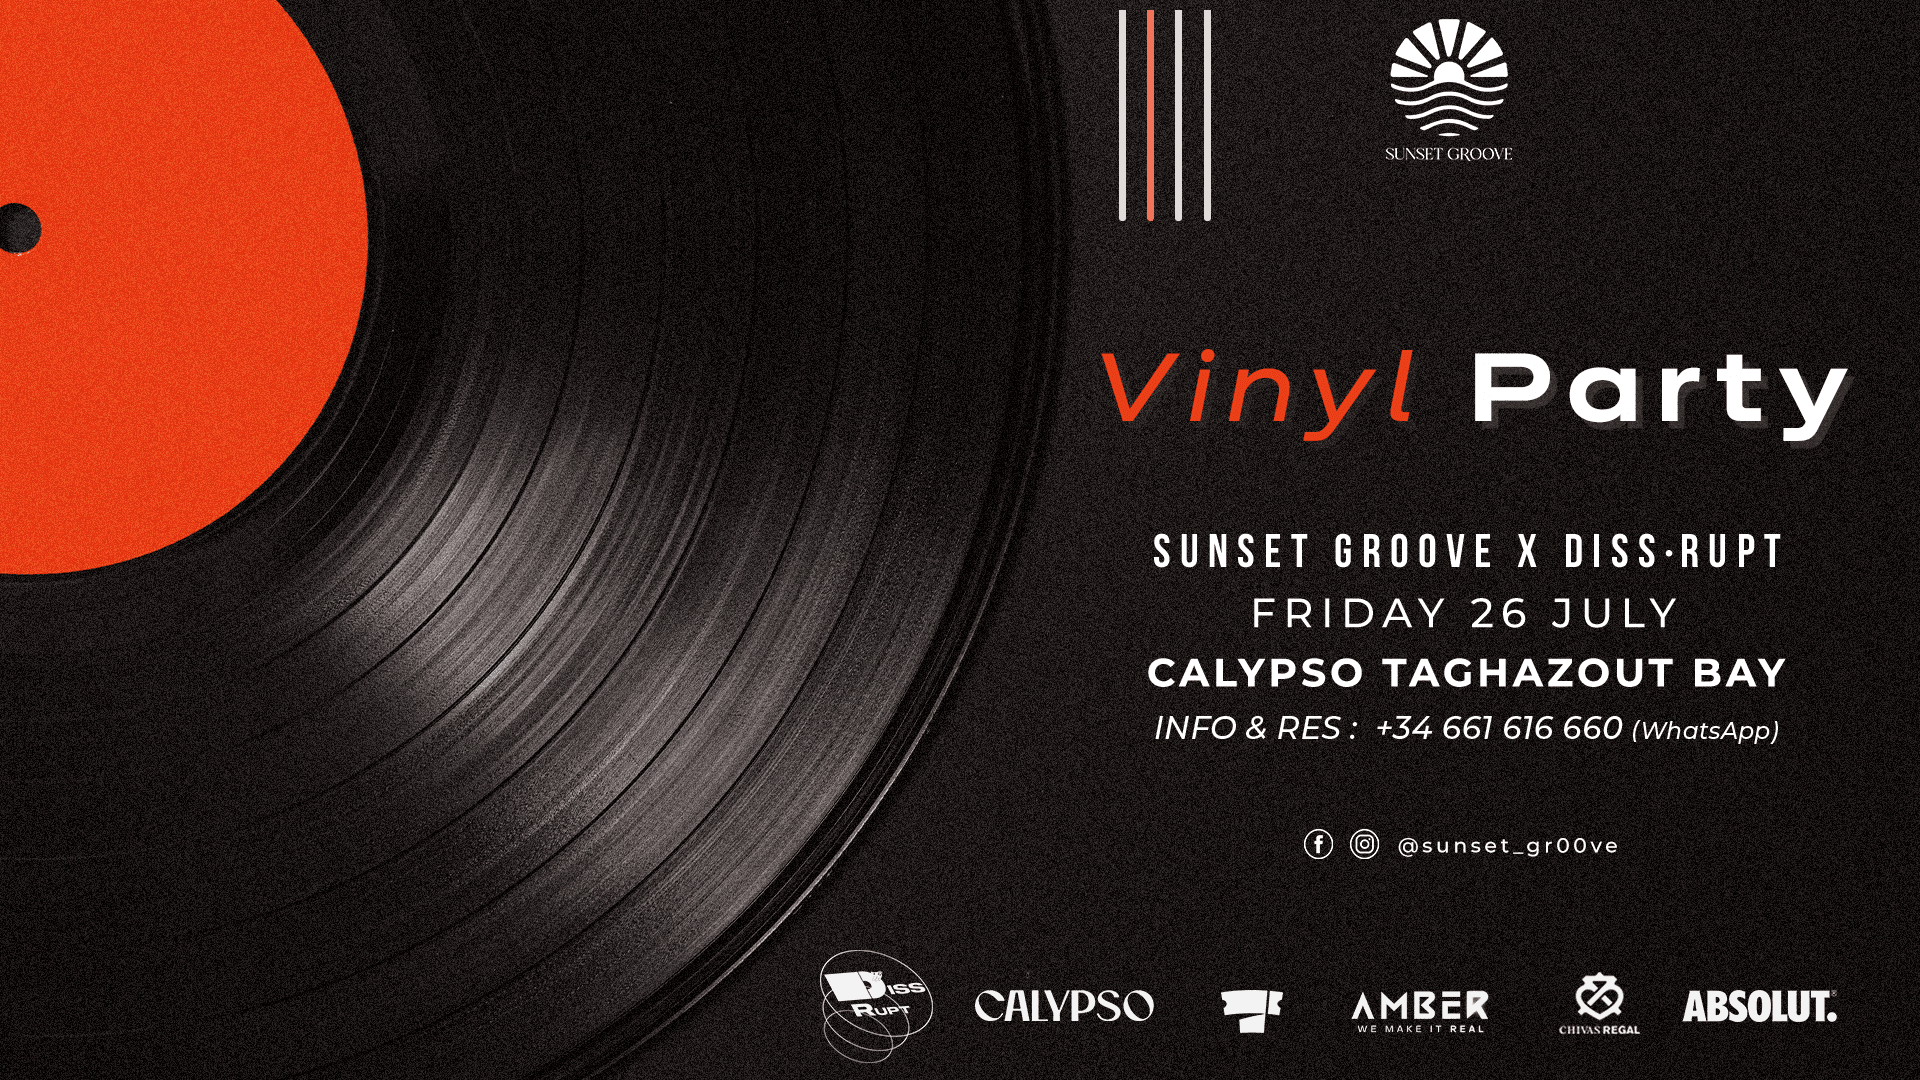 Sunset Groove - Vinyl Party